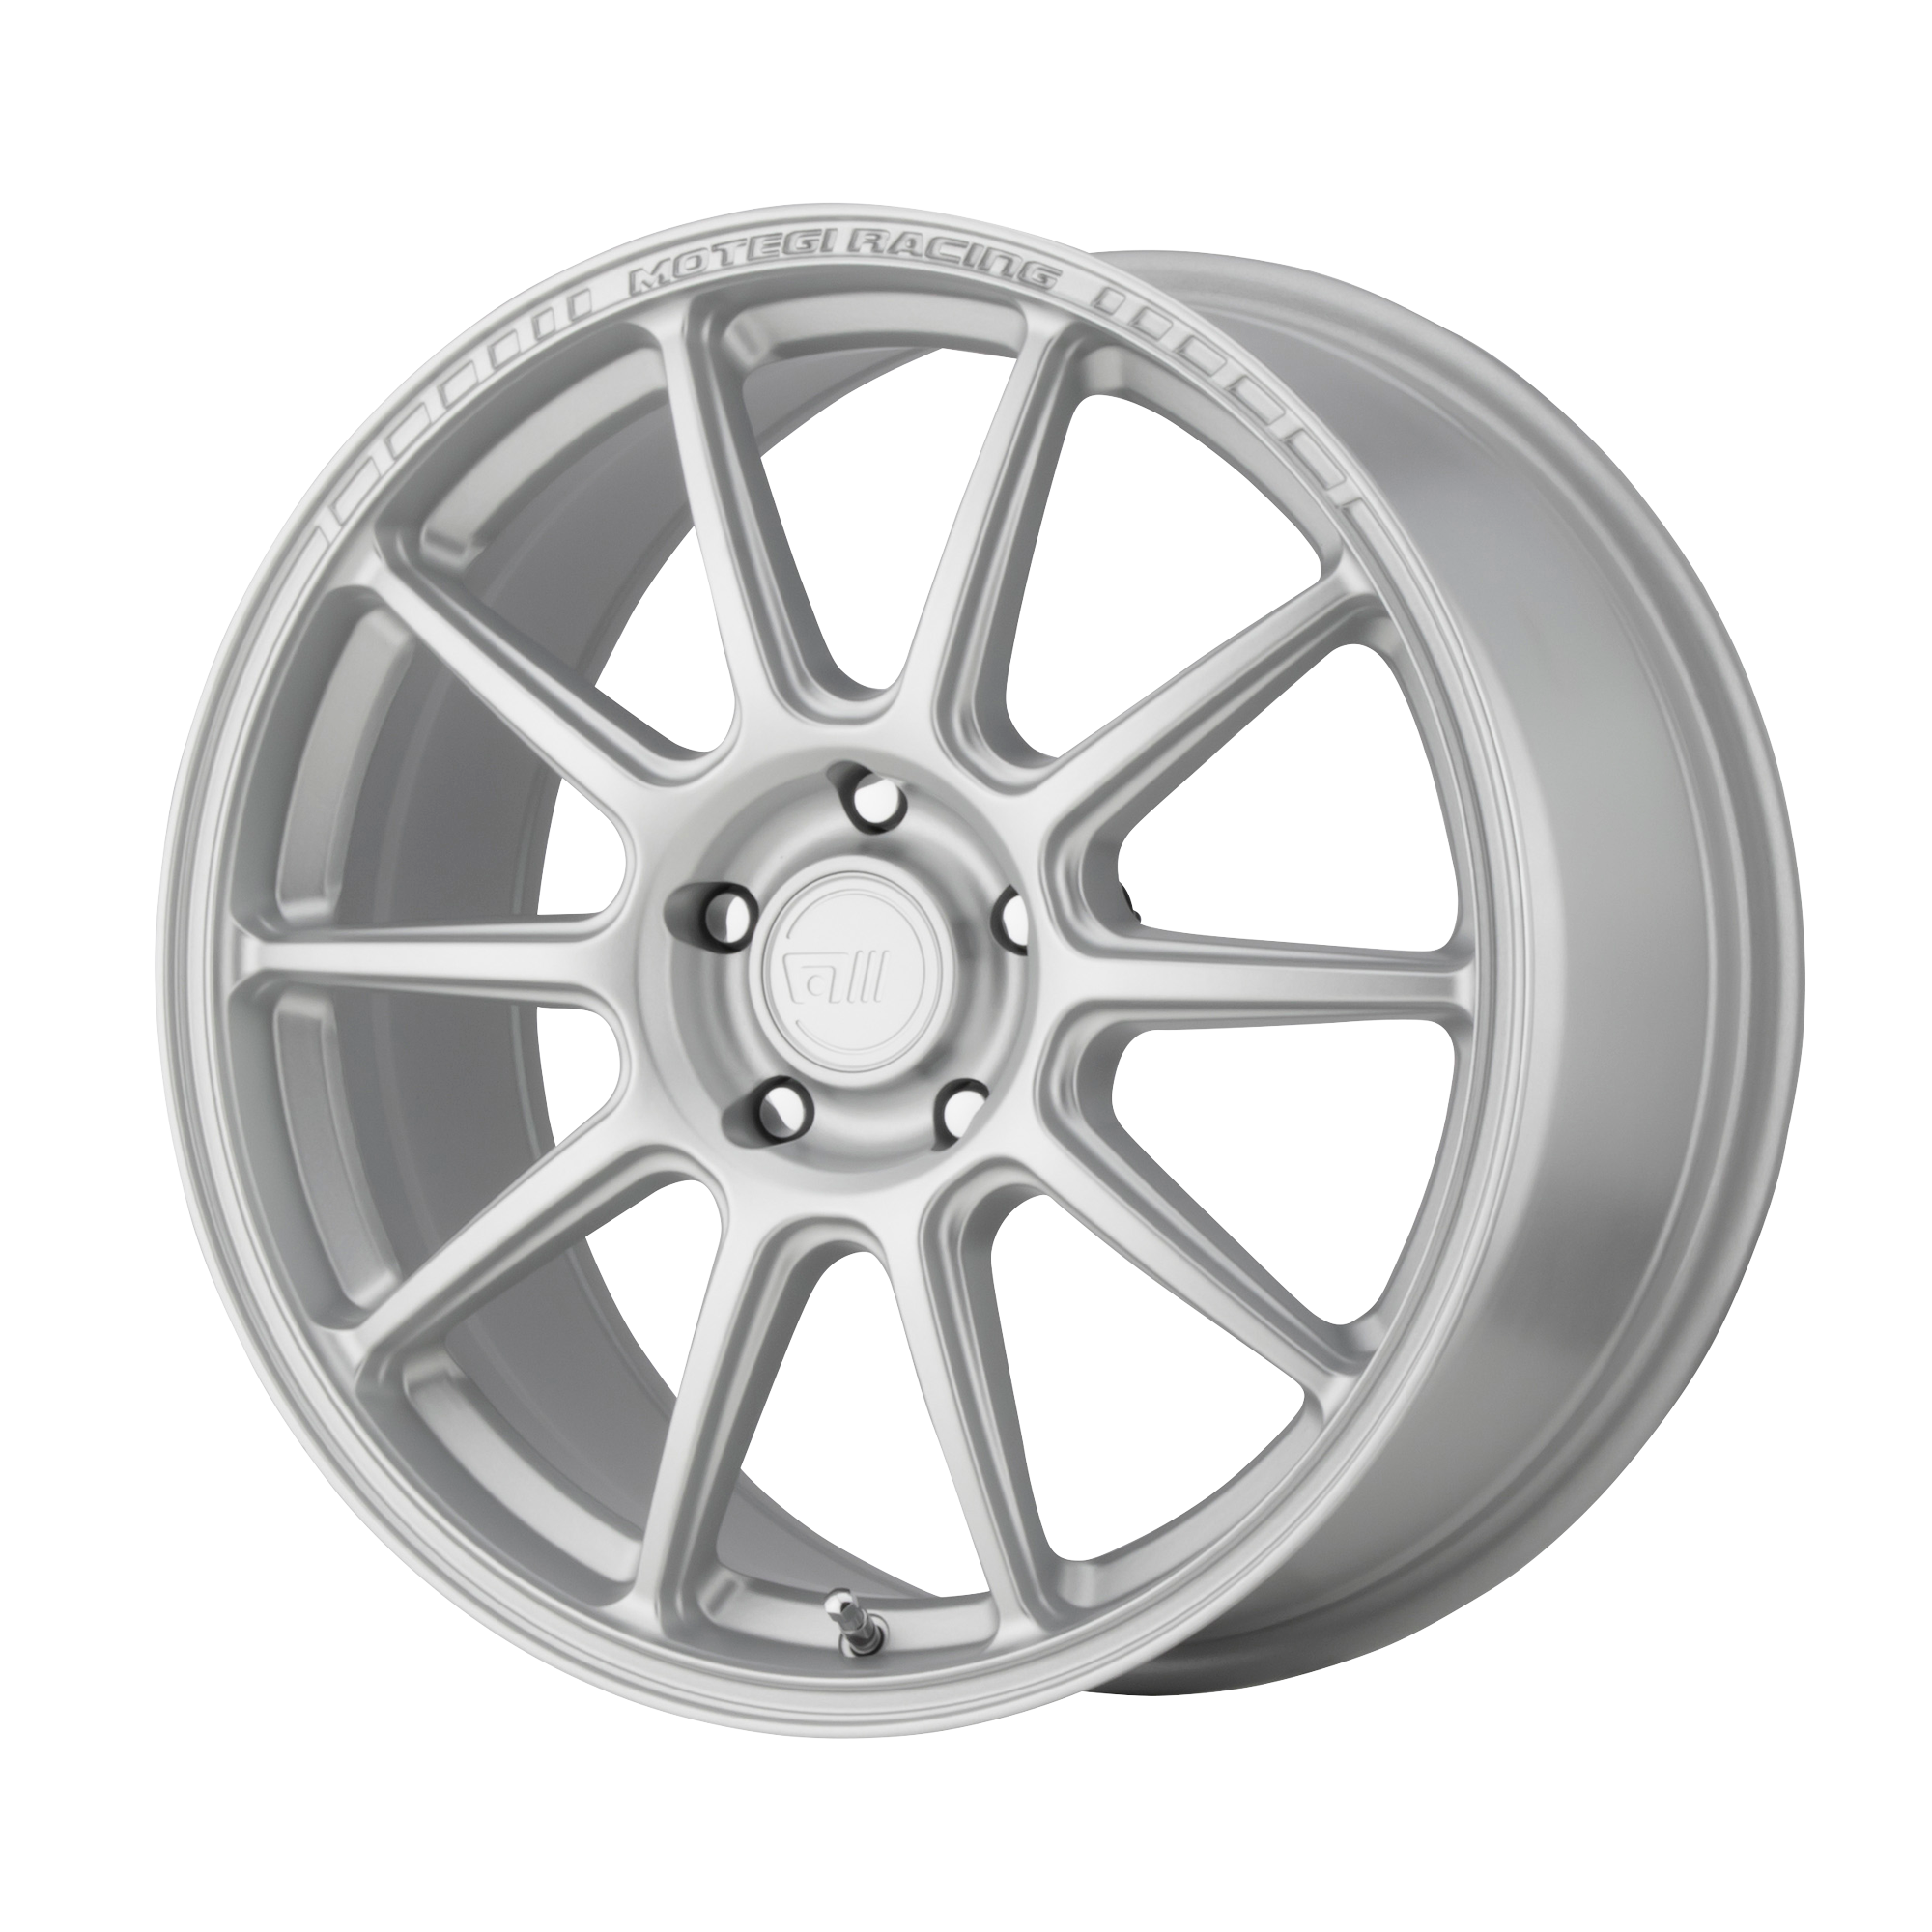 MR140 18x8.5 5x114.30 HYPER SILVER (45 mm) - Tires and Engine Performance